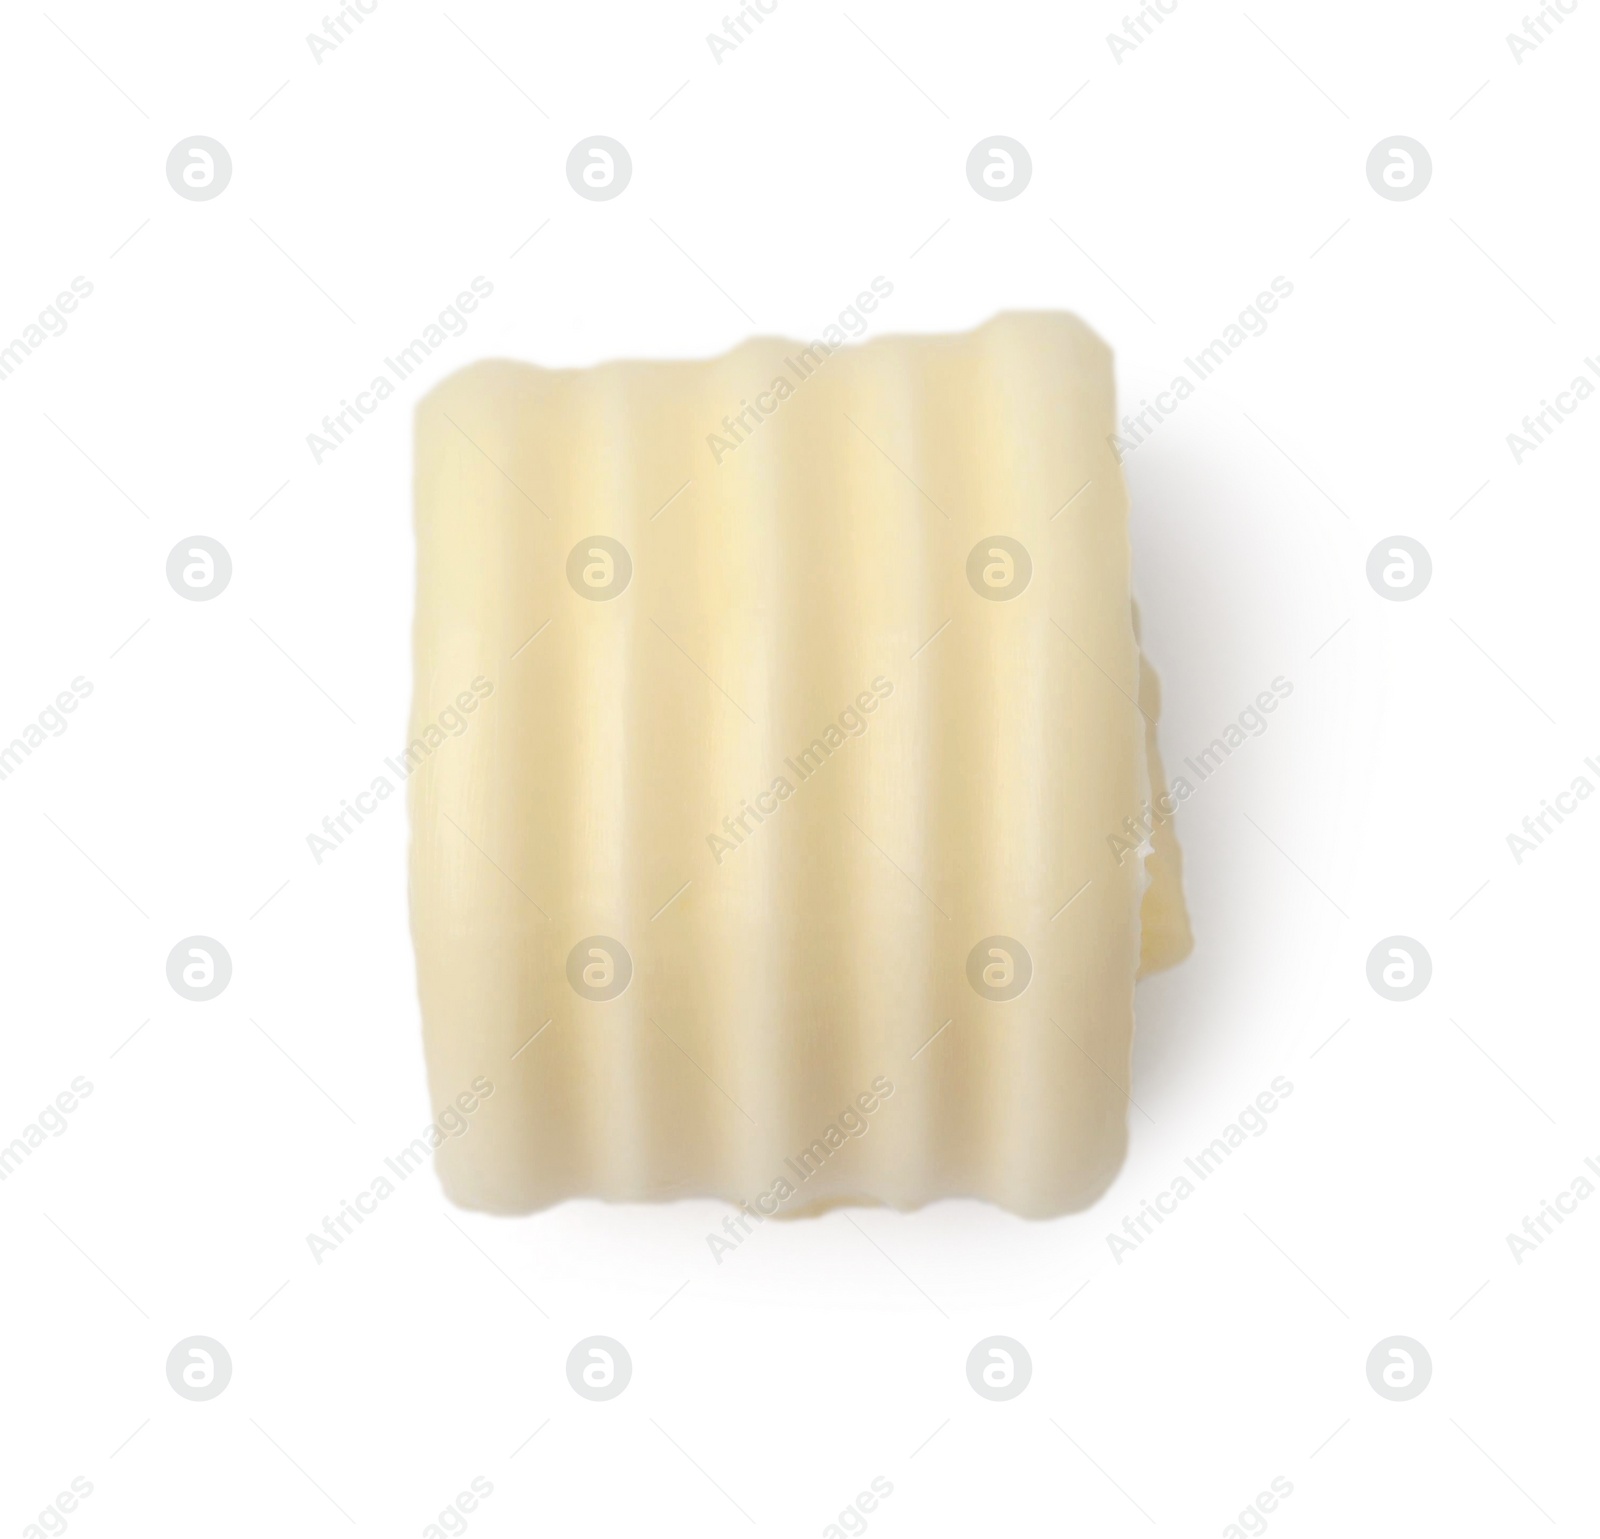 Photo of One tasty butter curl isolated on white, top view